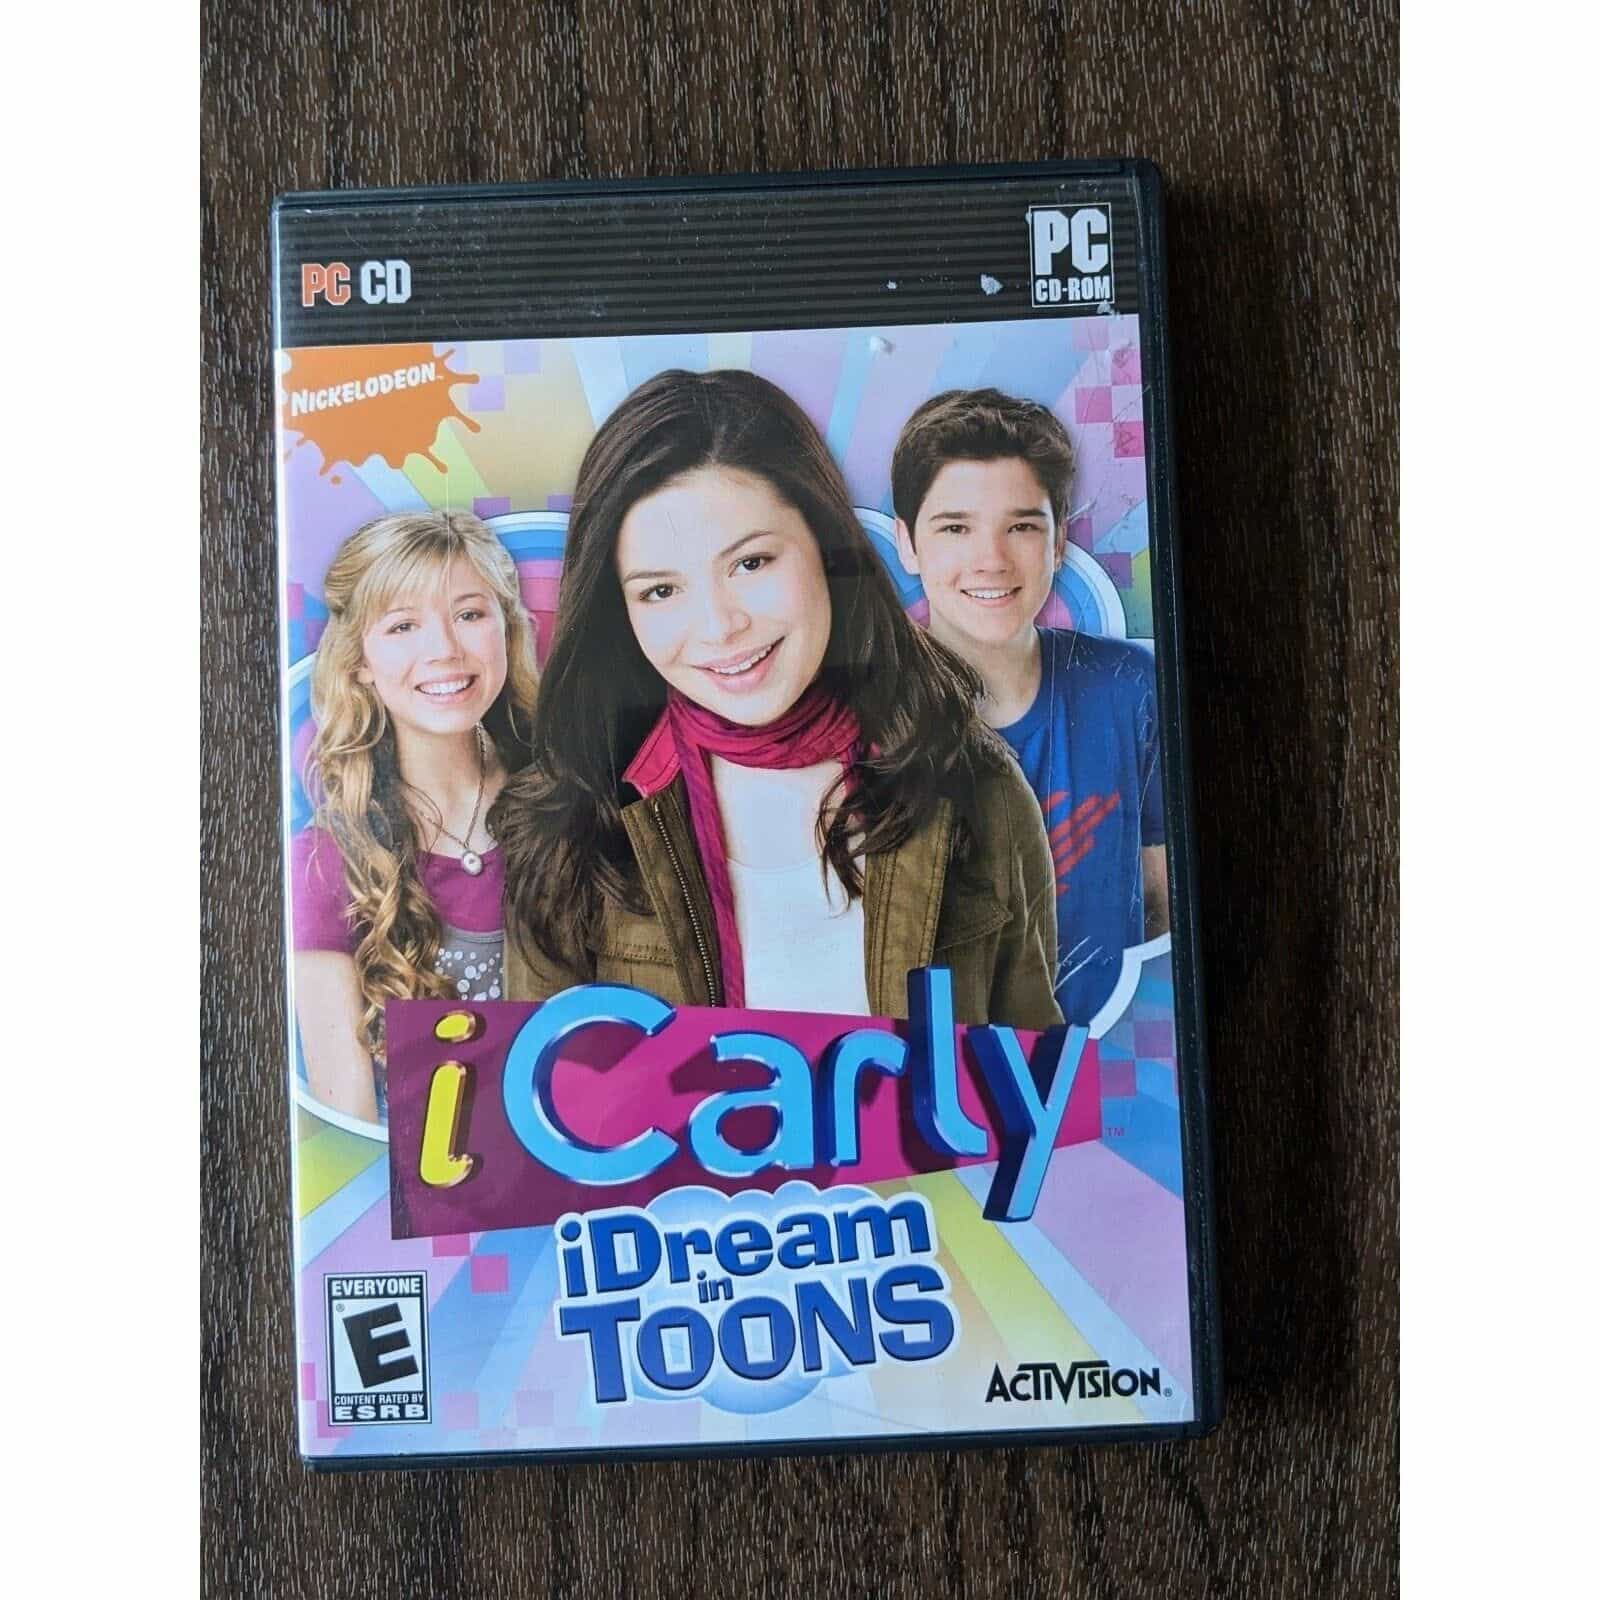 iCarly iDream In Toons PC Game